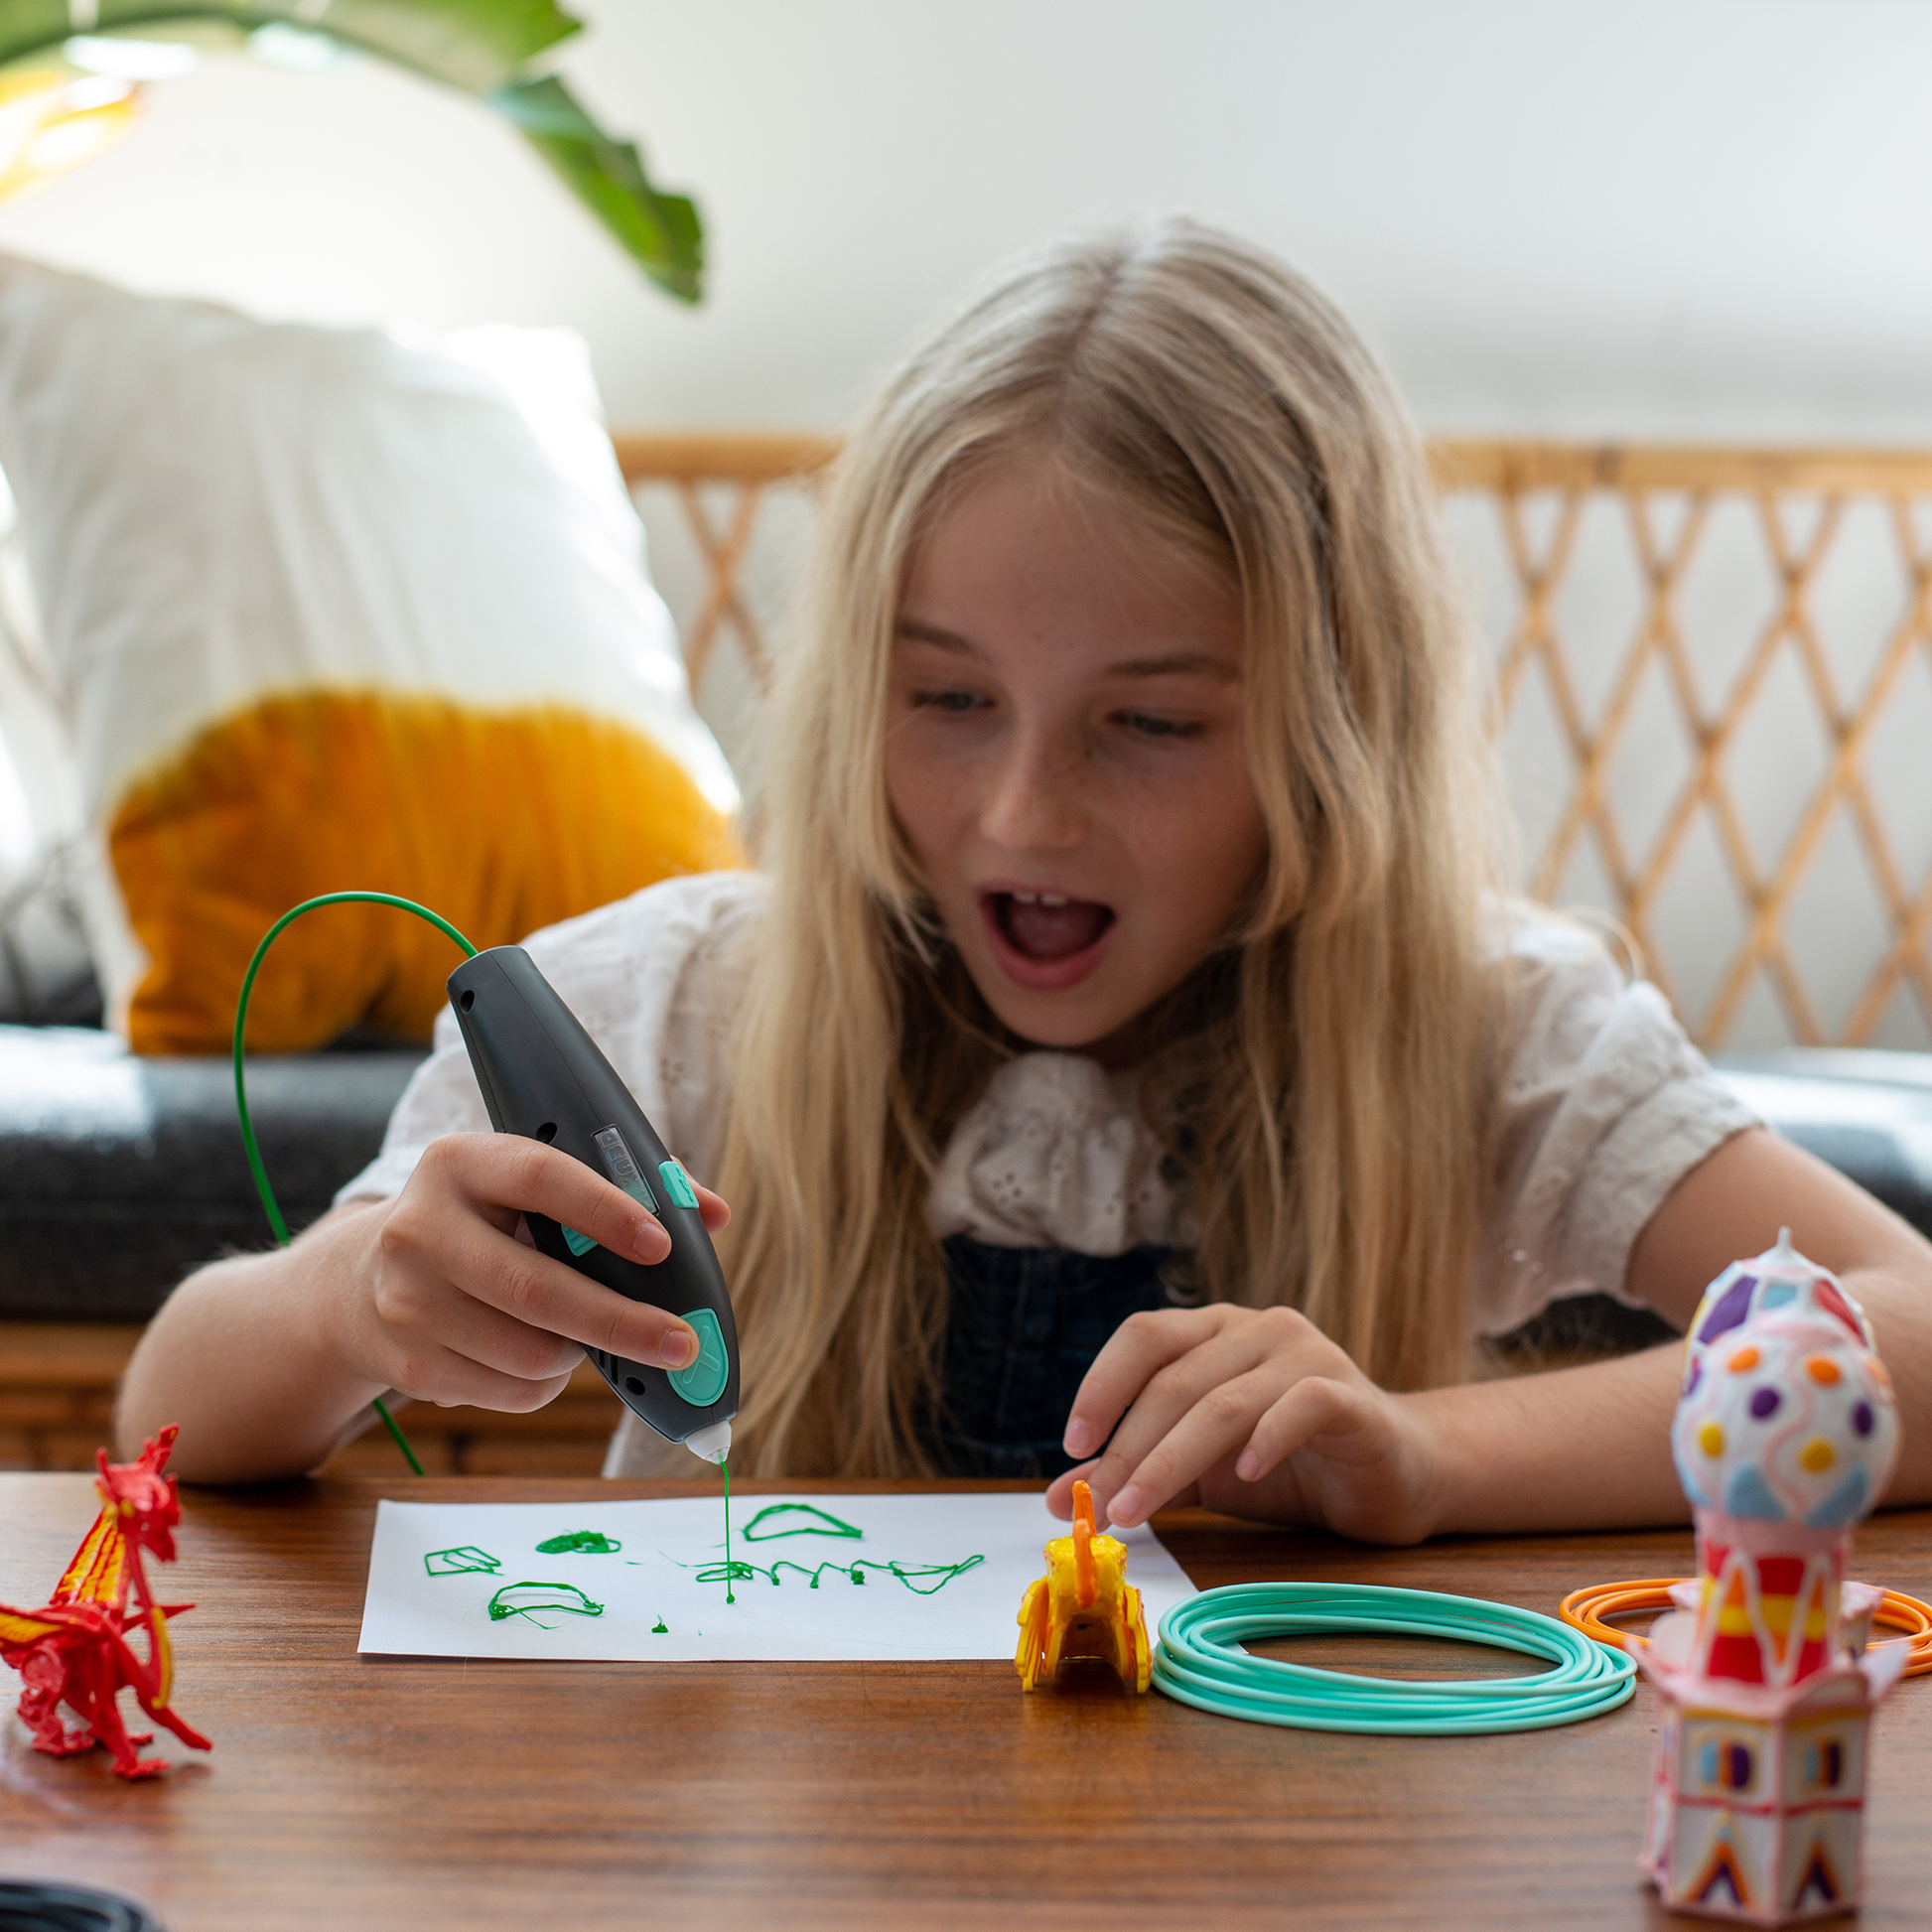 PIKA3D Junior 3D Printing Pen for Kids Ages 6+ - Ready to use and Child  Safe 3D Pen with no hot Parts, Free Refills Included